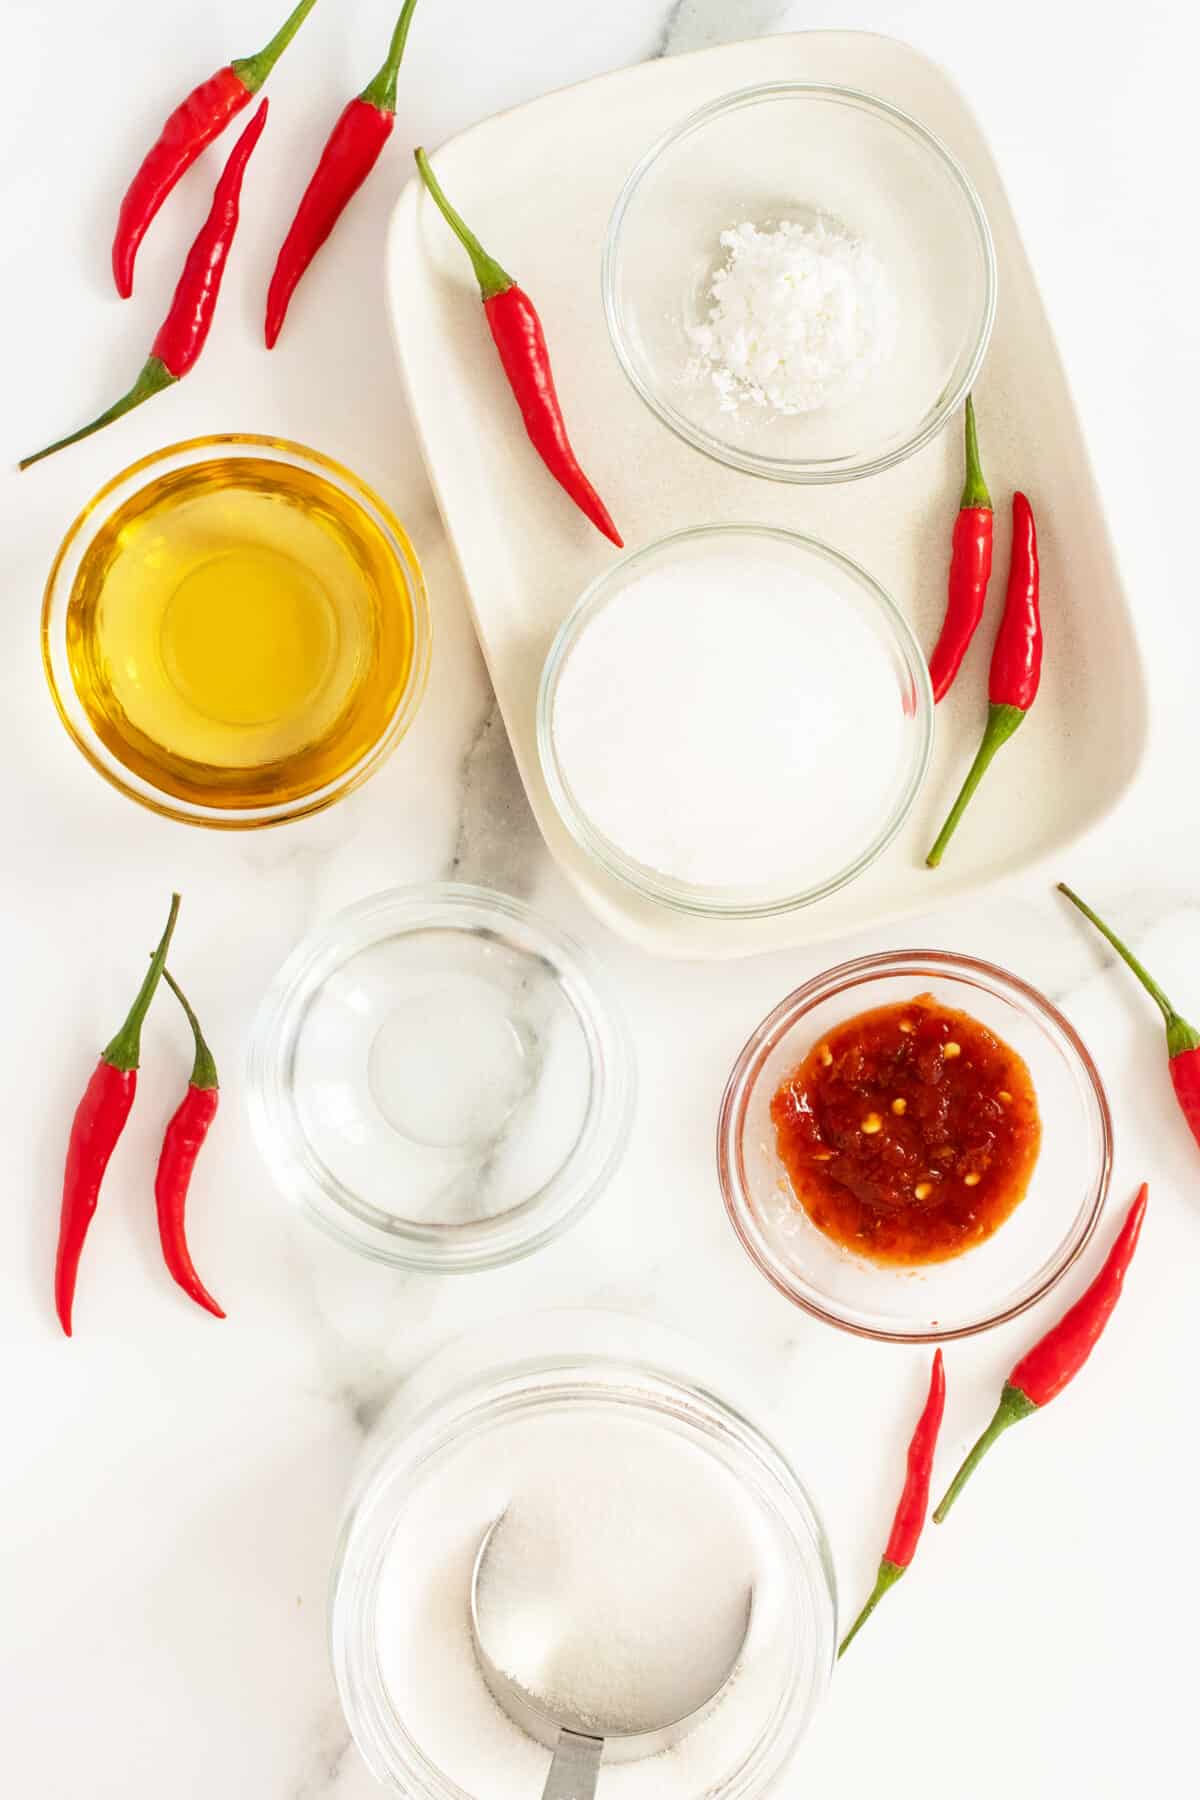 sweet chili sauce ingredients in small clear bowls